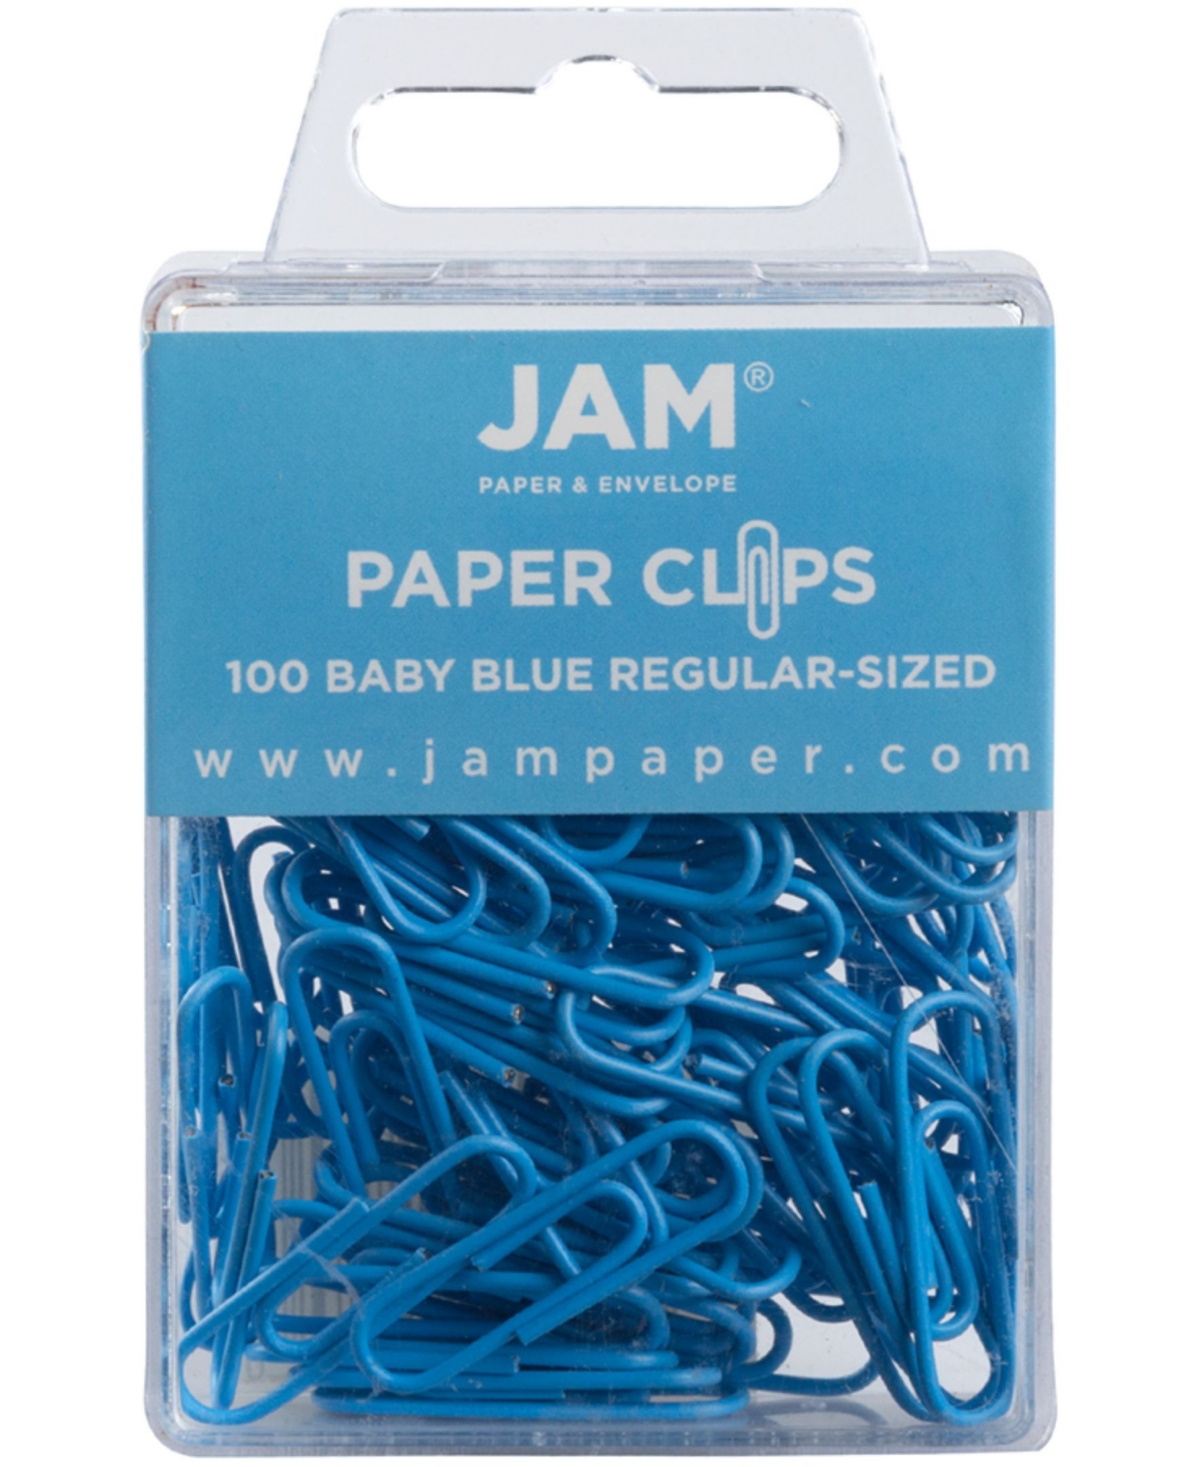 Jam Paper Colorful Standard Paper Clips In Baby Blue